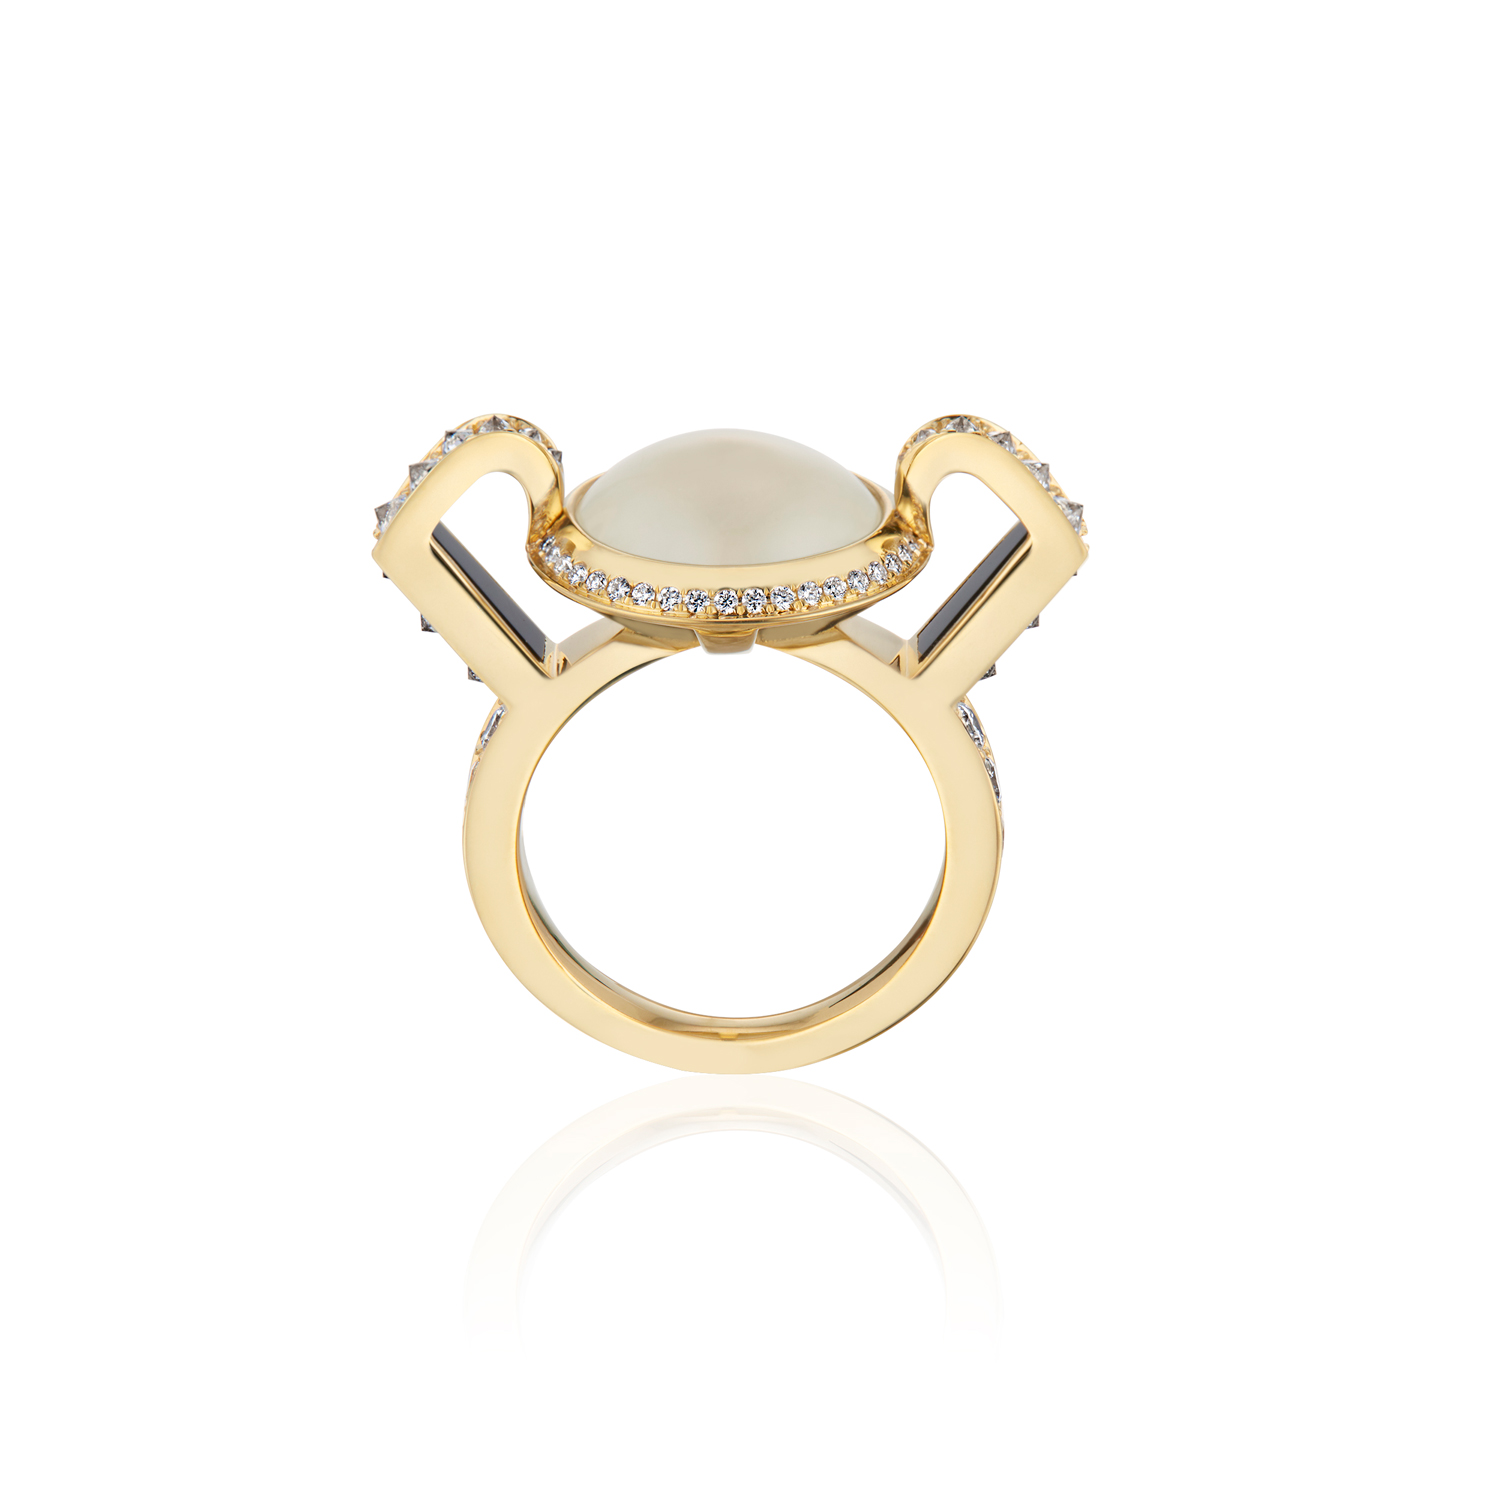 This is a front facing photo of the Renisis Reservoir Ice Ring by artist Sardwell. It is crafted in 18k yellow gold with inverted diamonds and a translucent ice jade center. Its setting is high and dramatic.